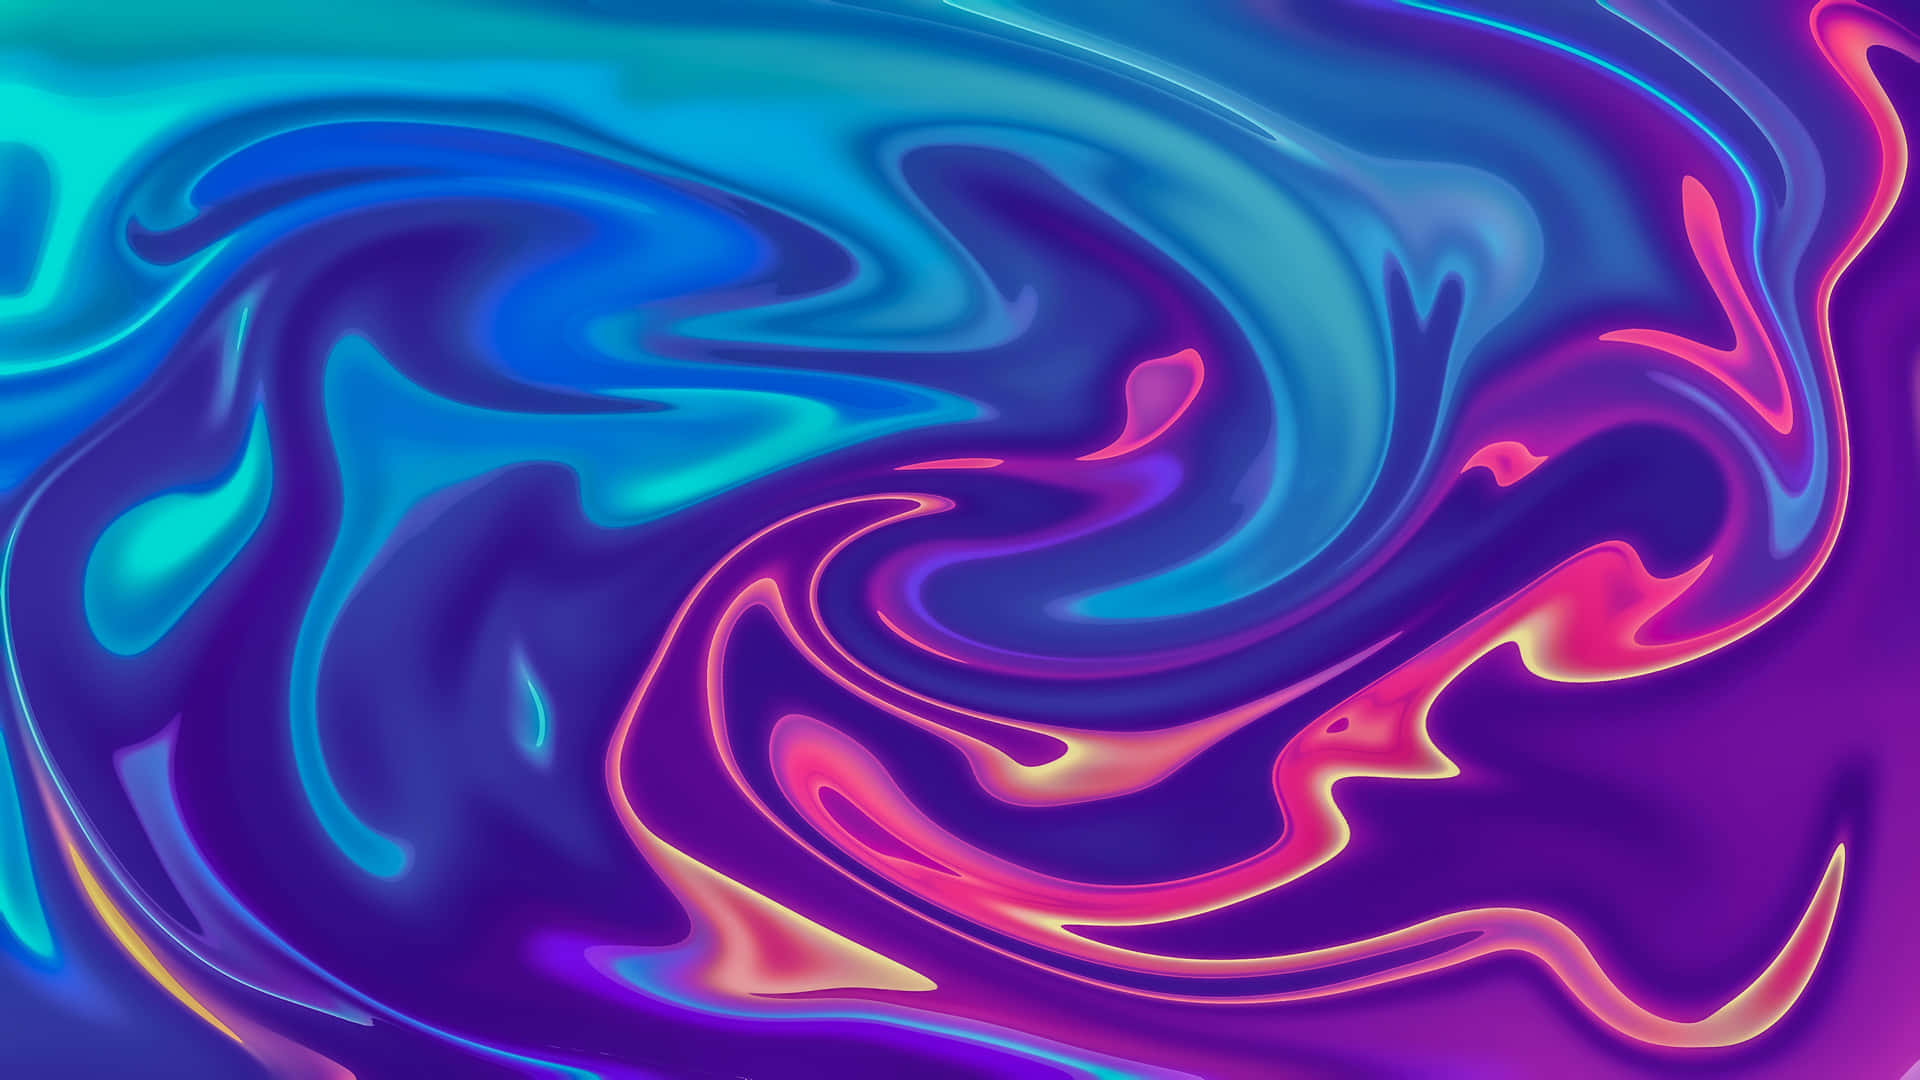 The Colorful Chaos of a Swirl Wallpaper